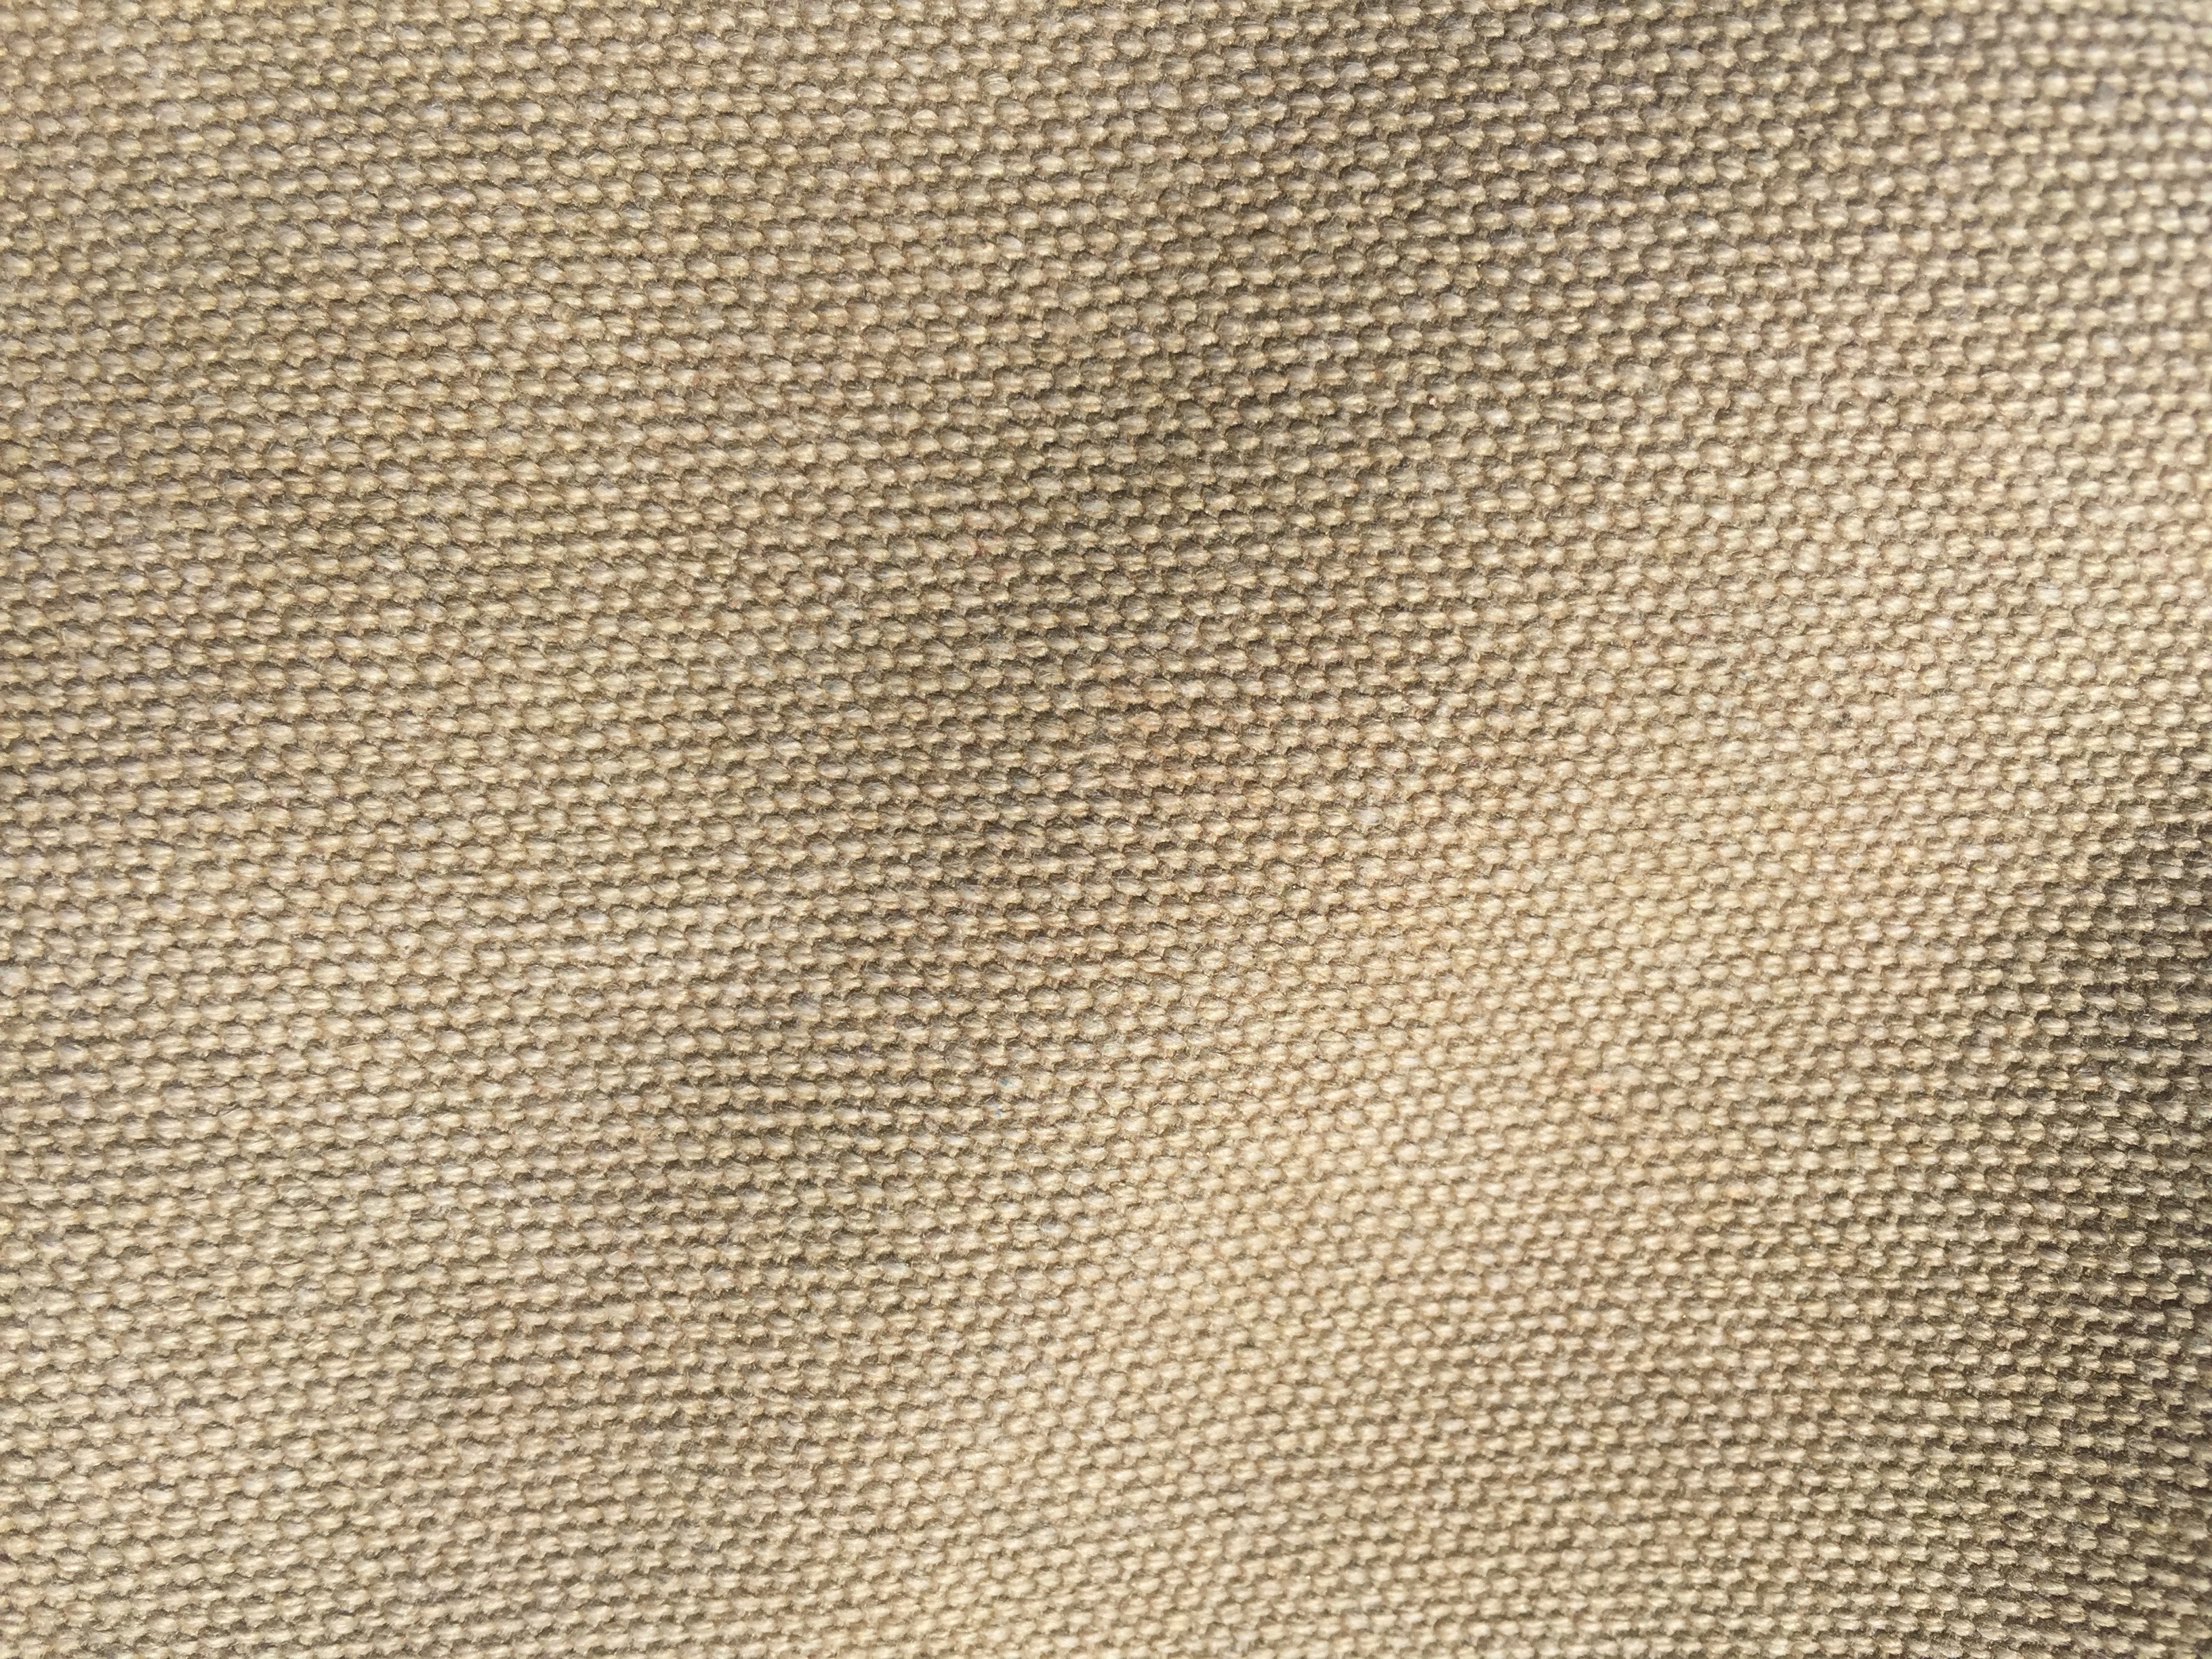 Canvas fabric close up details of stitching | Free Textures